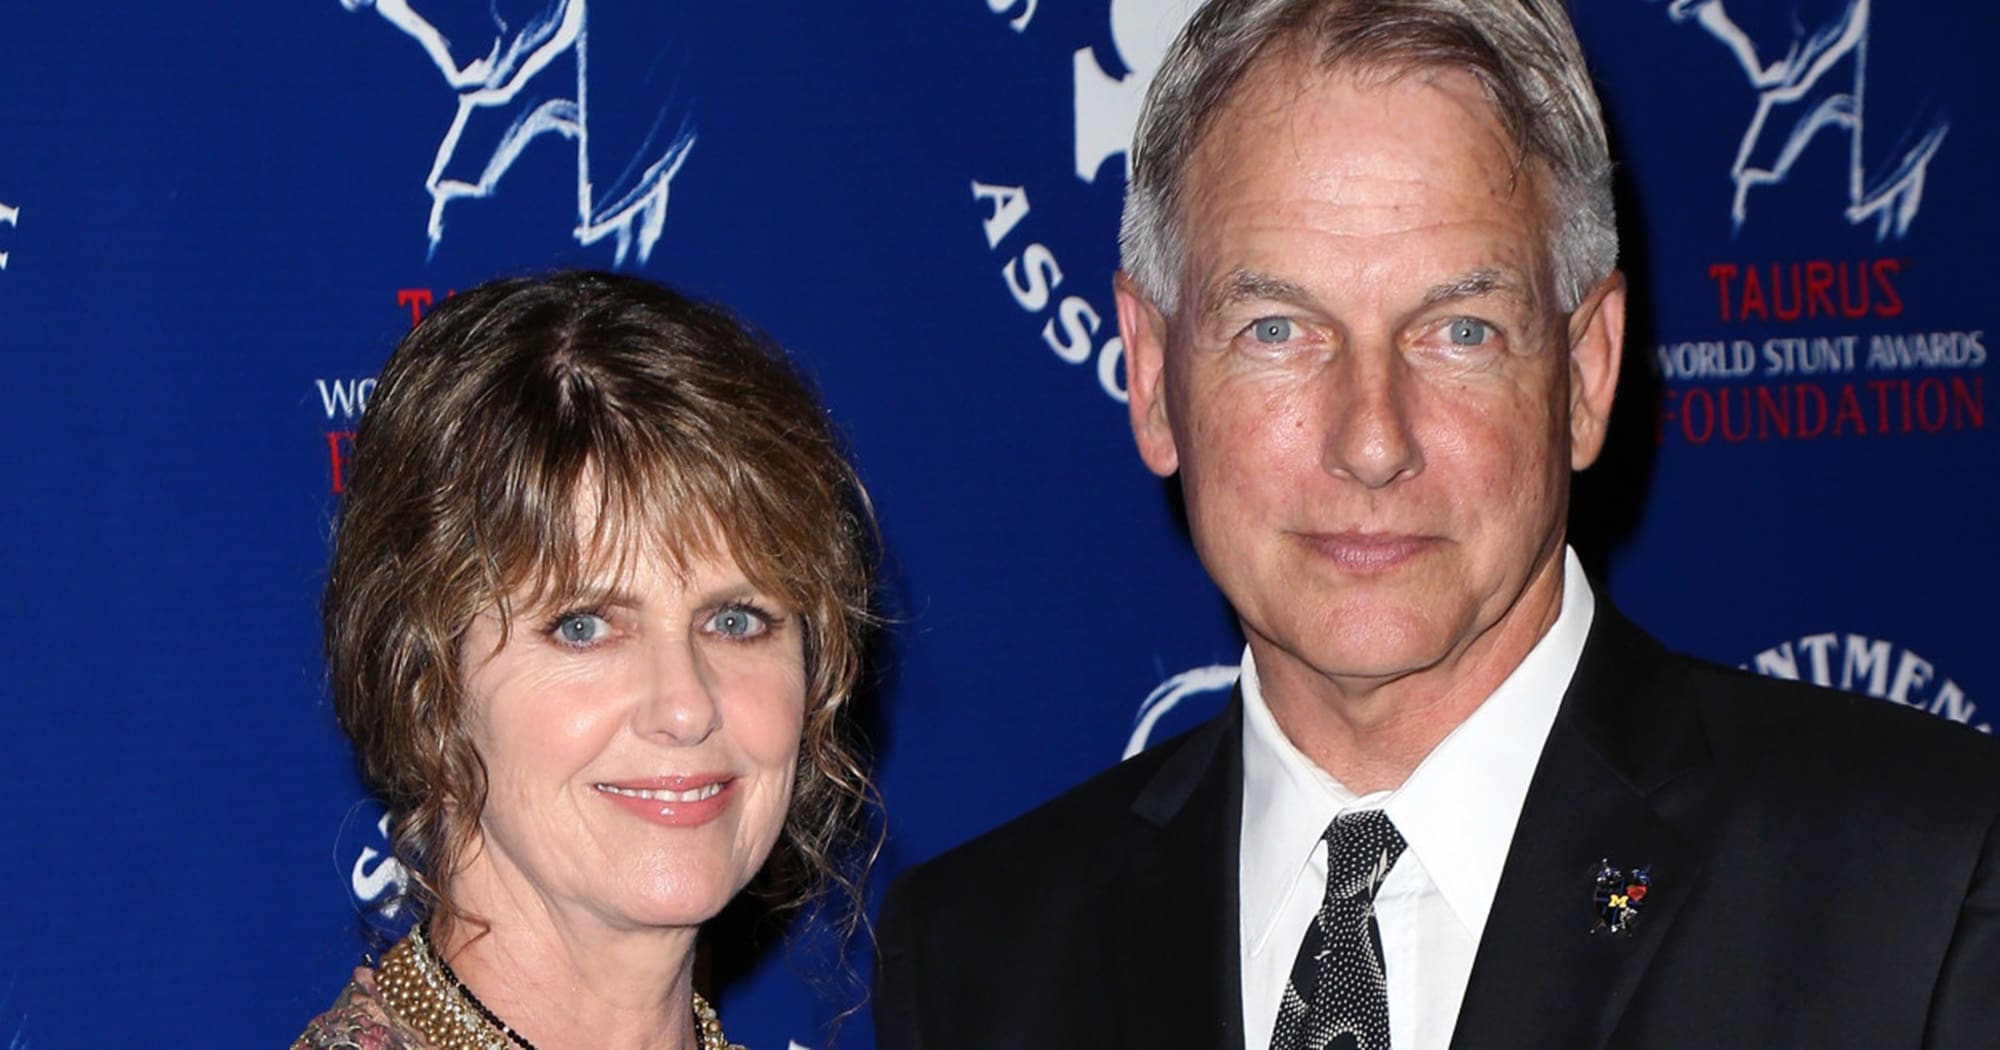 ”mark-harmon-admits-his-marriage-to-pam-dawber-is-not-natural-in-hollywood-how-does-ncis-fit-in-his-32-year-union”